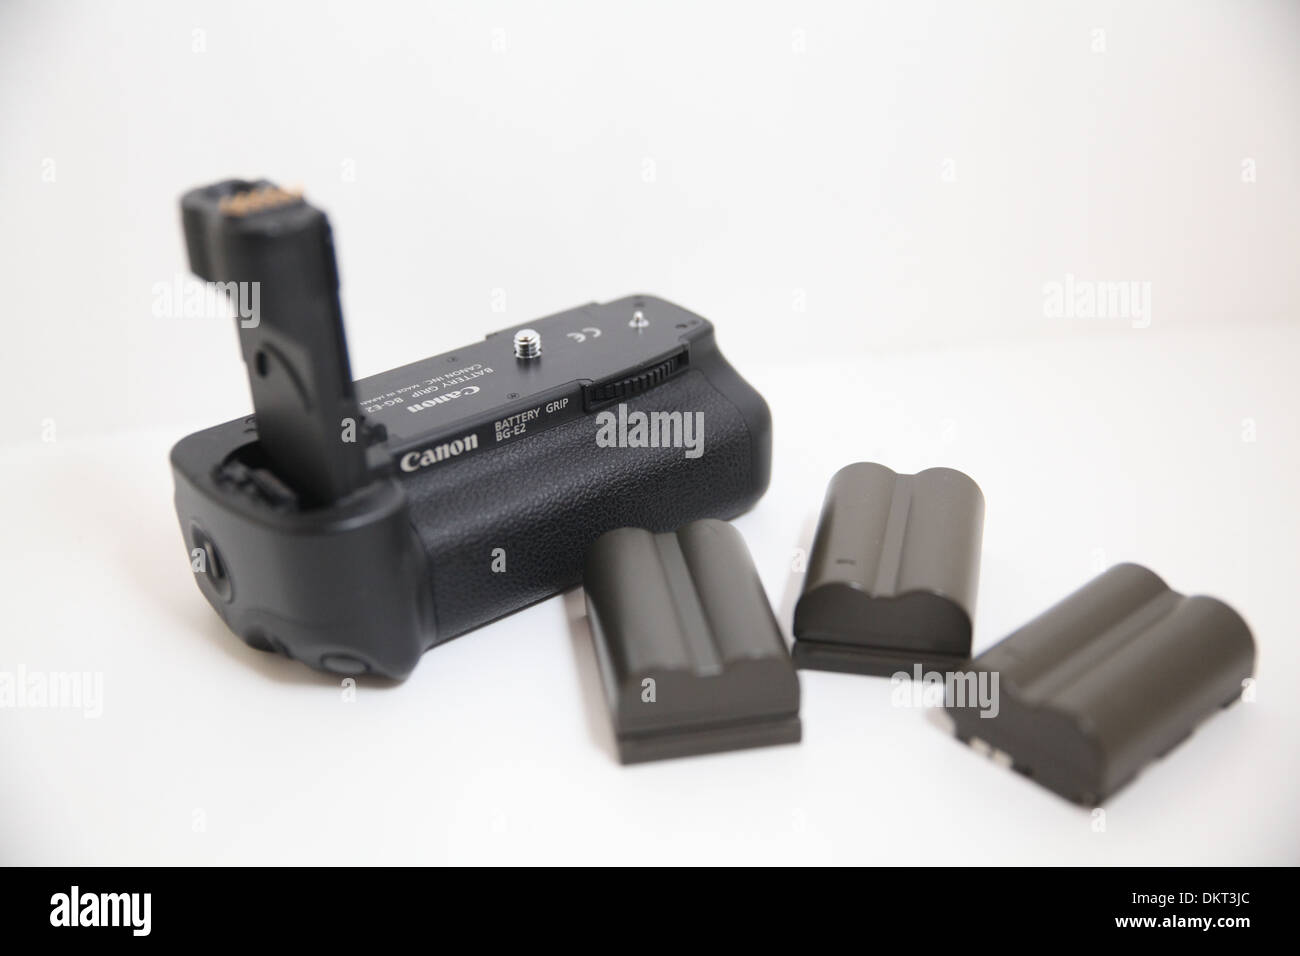 canon dslr vertical grip with batteries Stock Photo